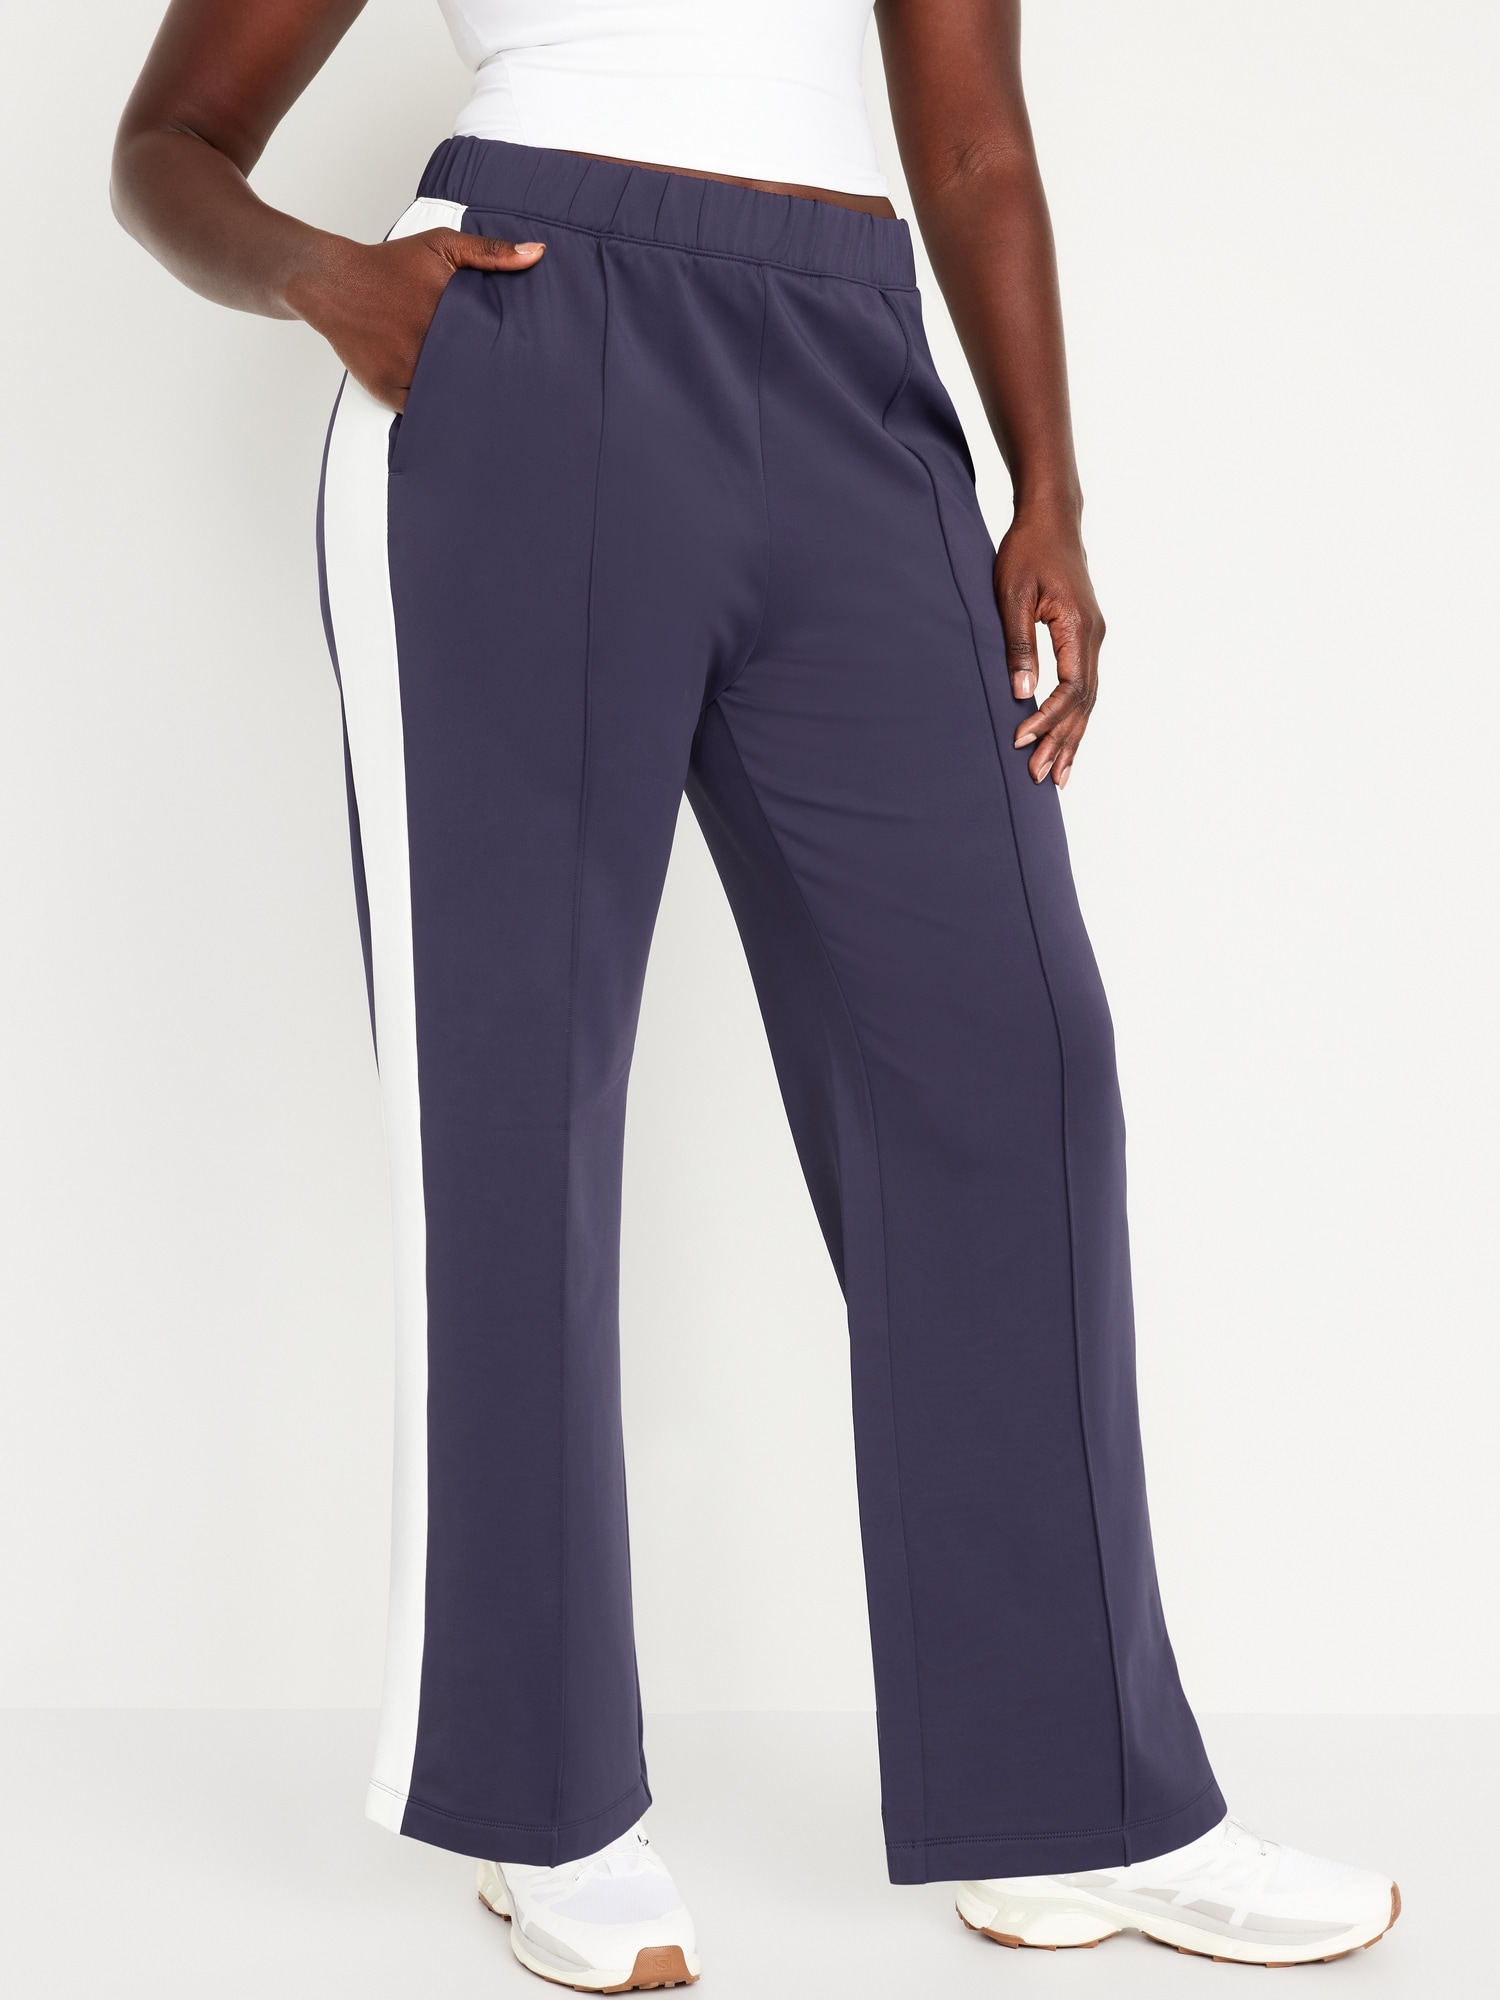 Trackpants: Shop Online Women Navy Blue Polyester Trackpants